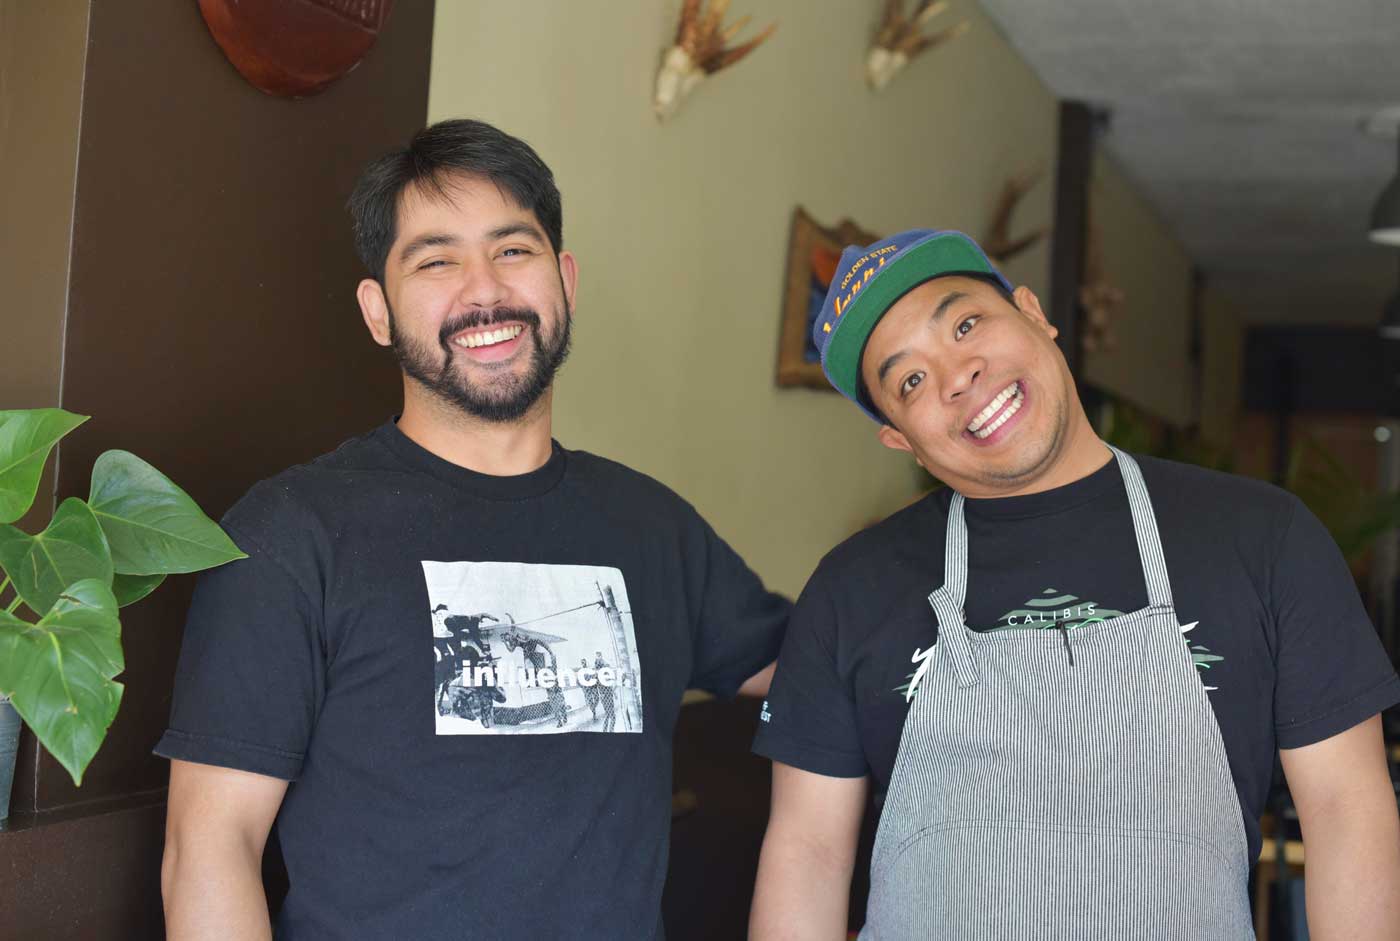 Chef Naputi and Shawn Camacho don't take business too seriously. 